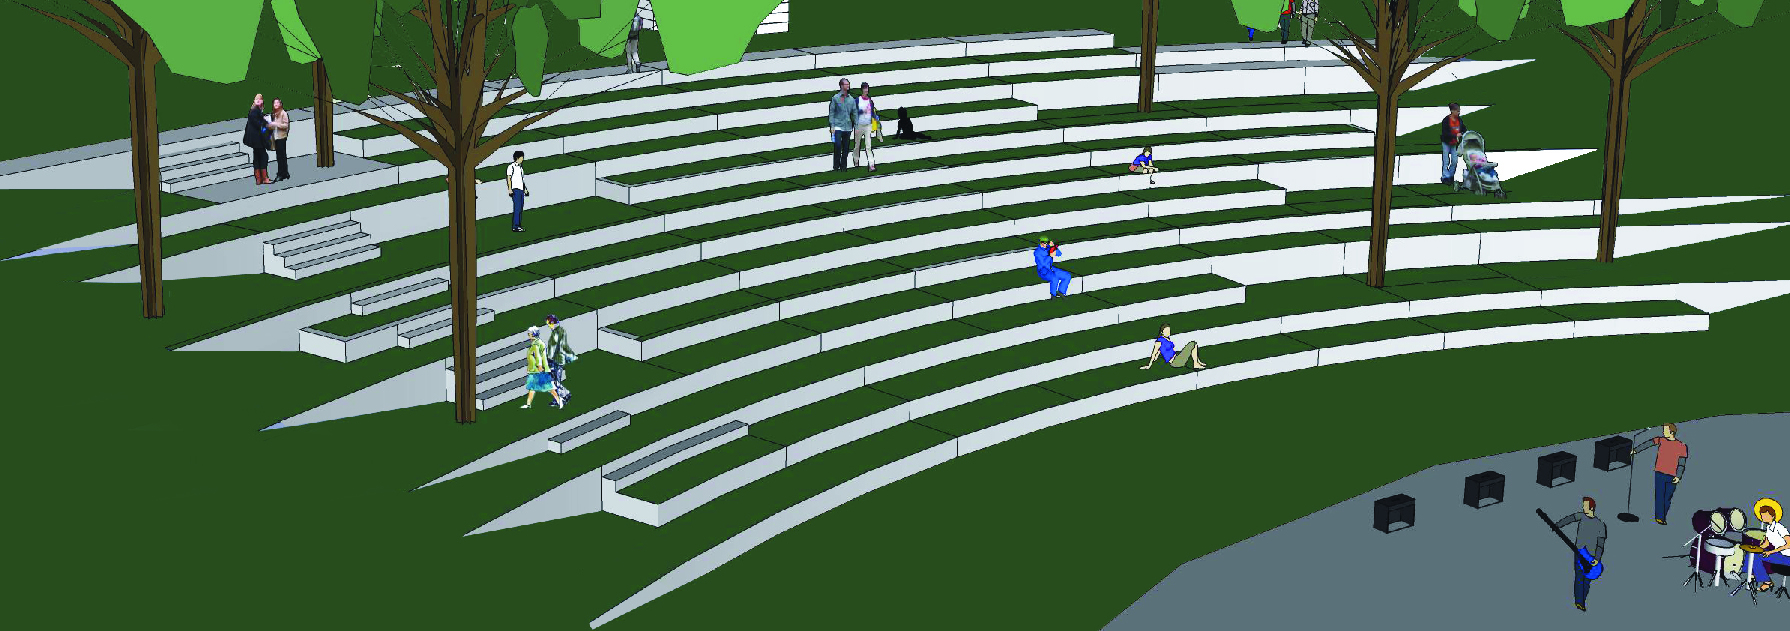 Rendering of the proposed amphitheater.